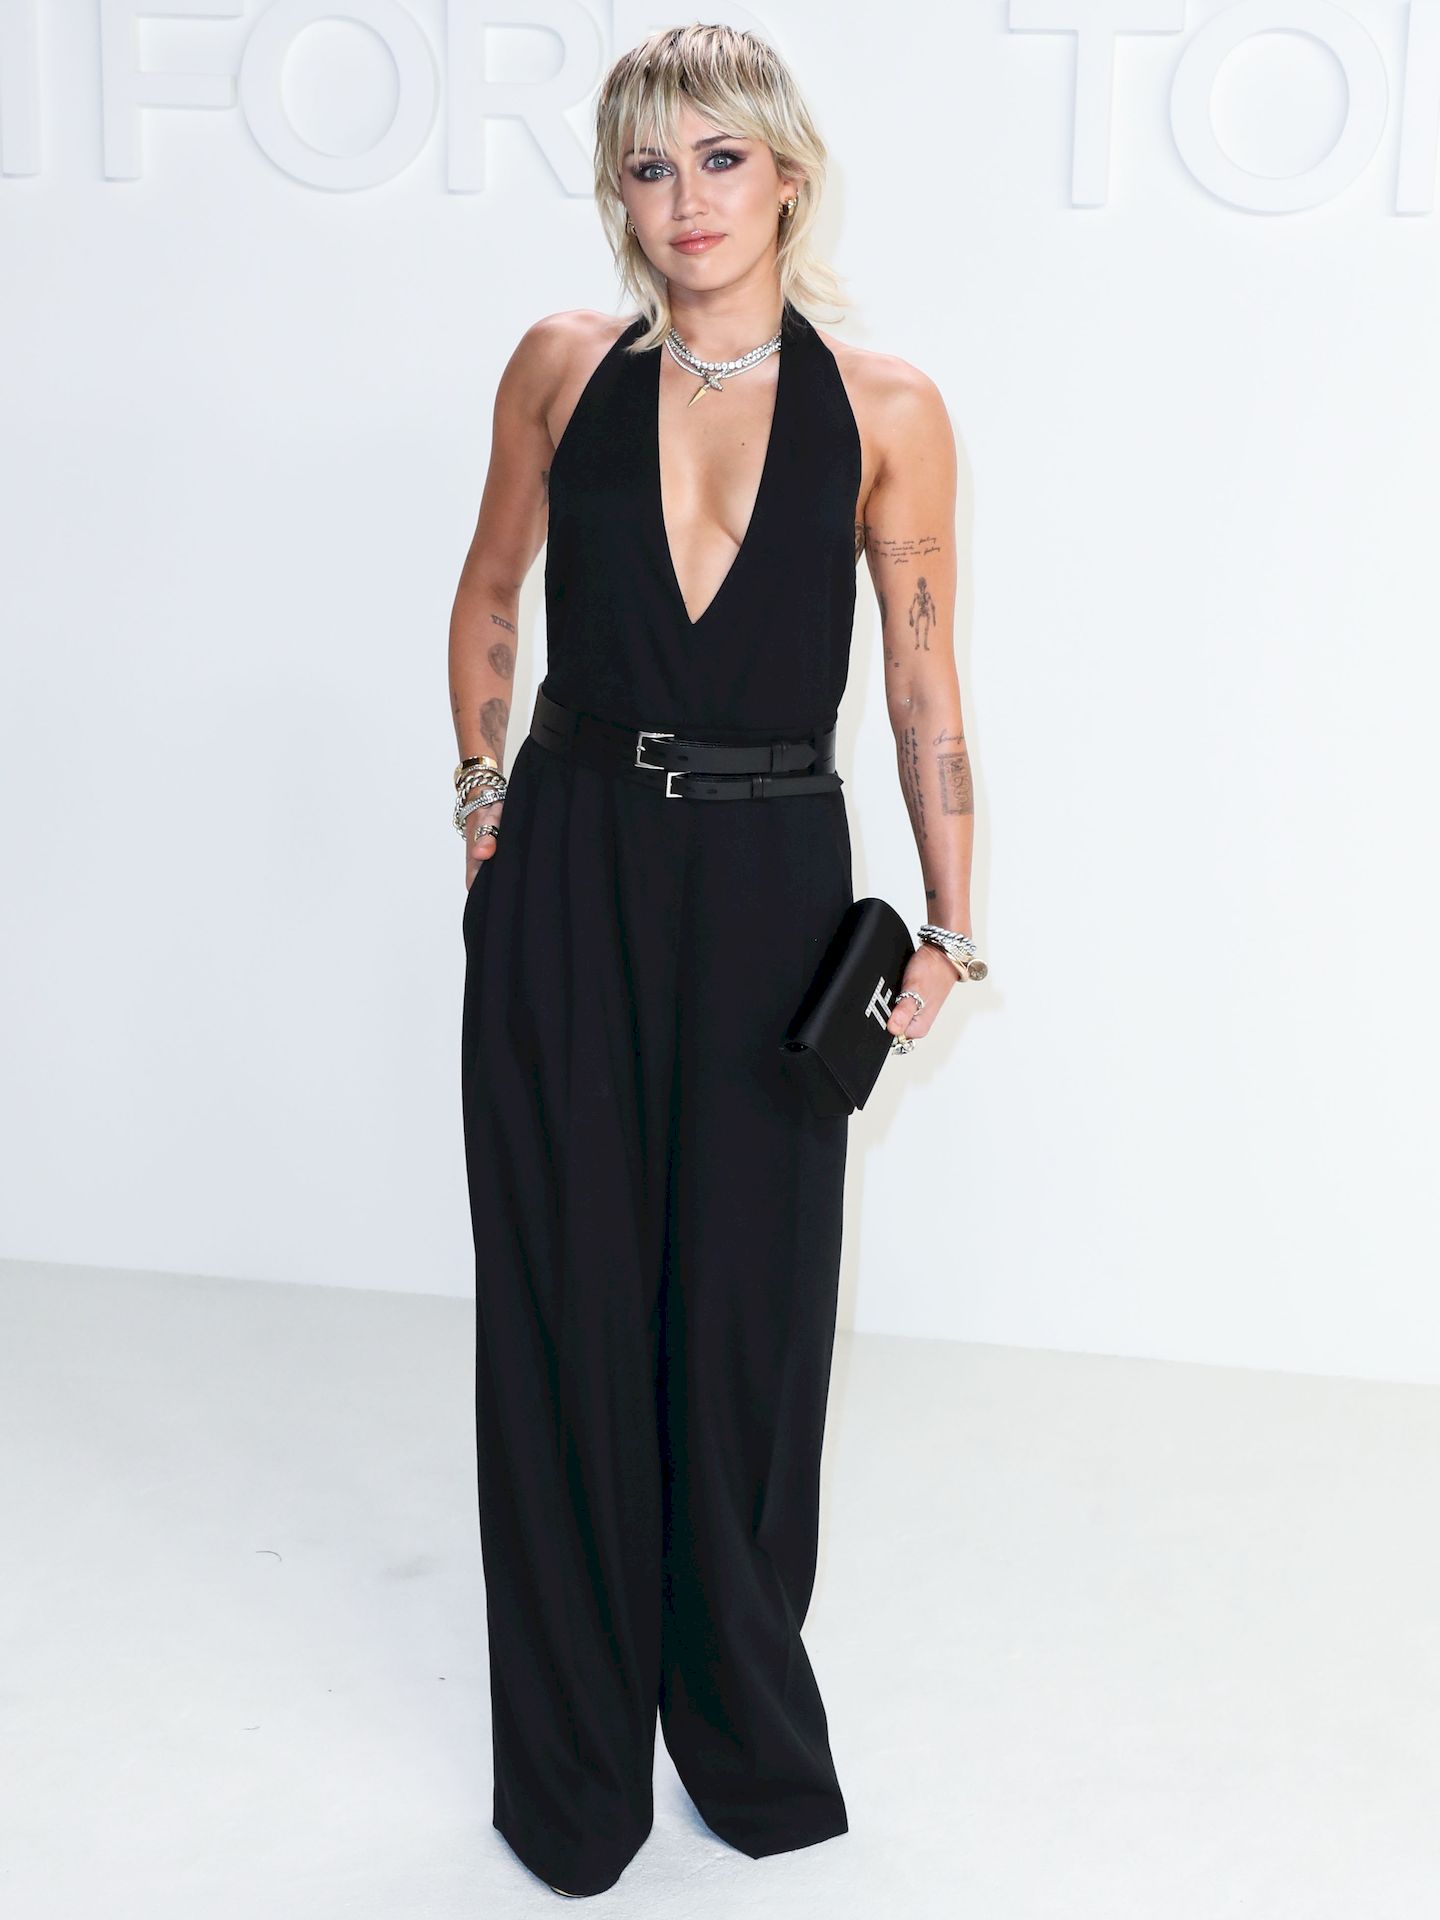 Miley-Cyrus-Looks-Sexy-at-the-Tom-Ford-Autumn_Winter-2020-Fashion-Show-0077.jpg